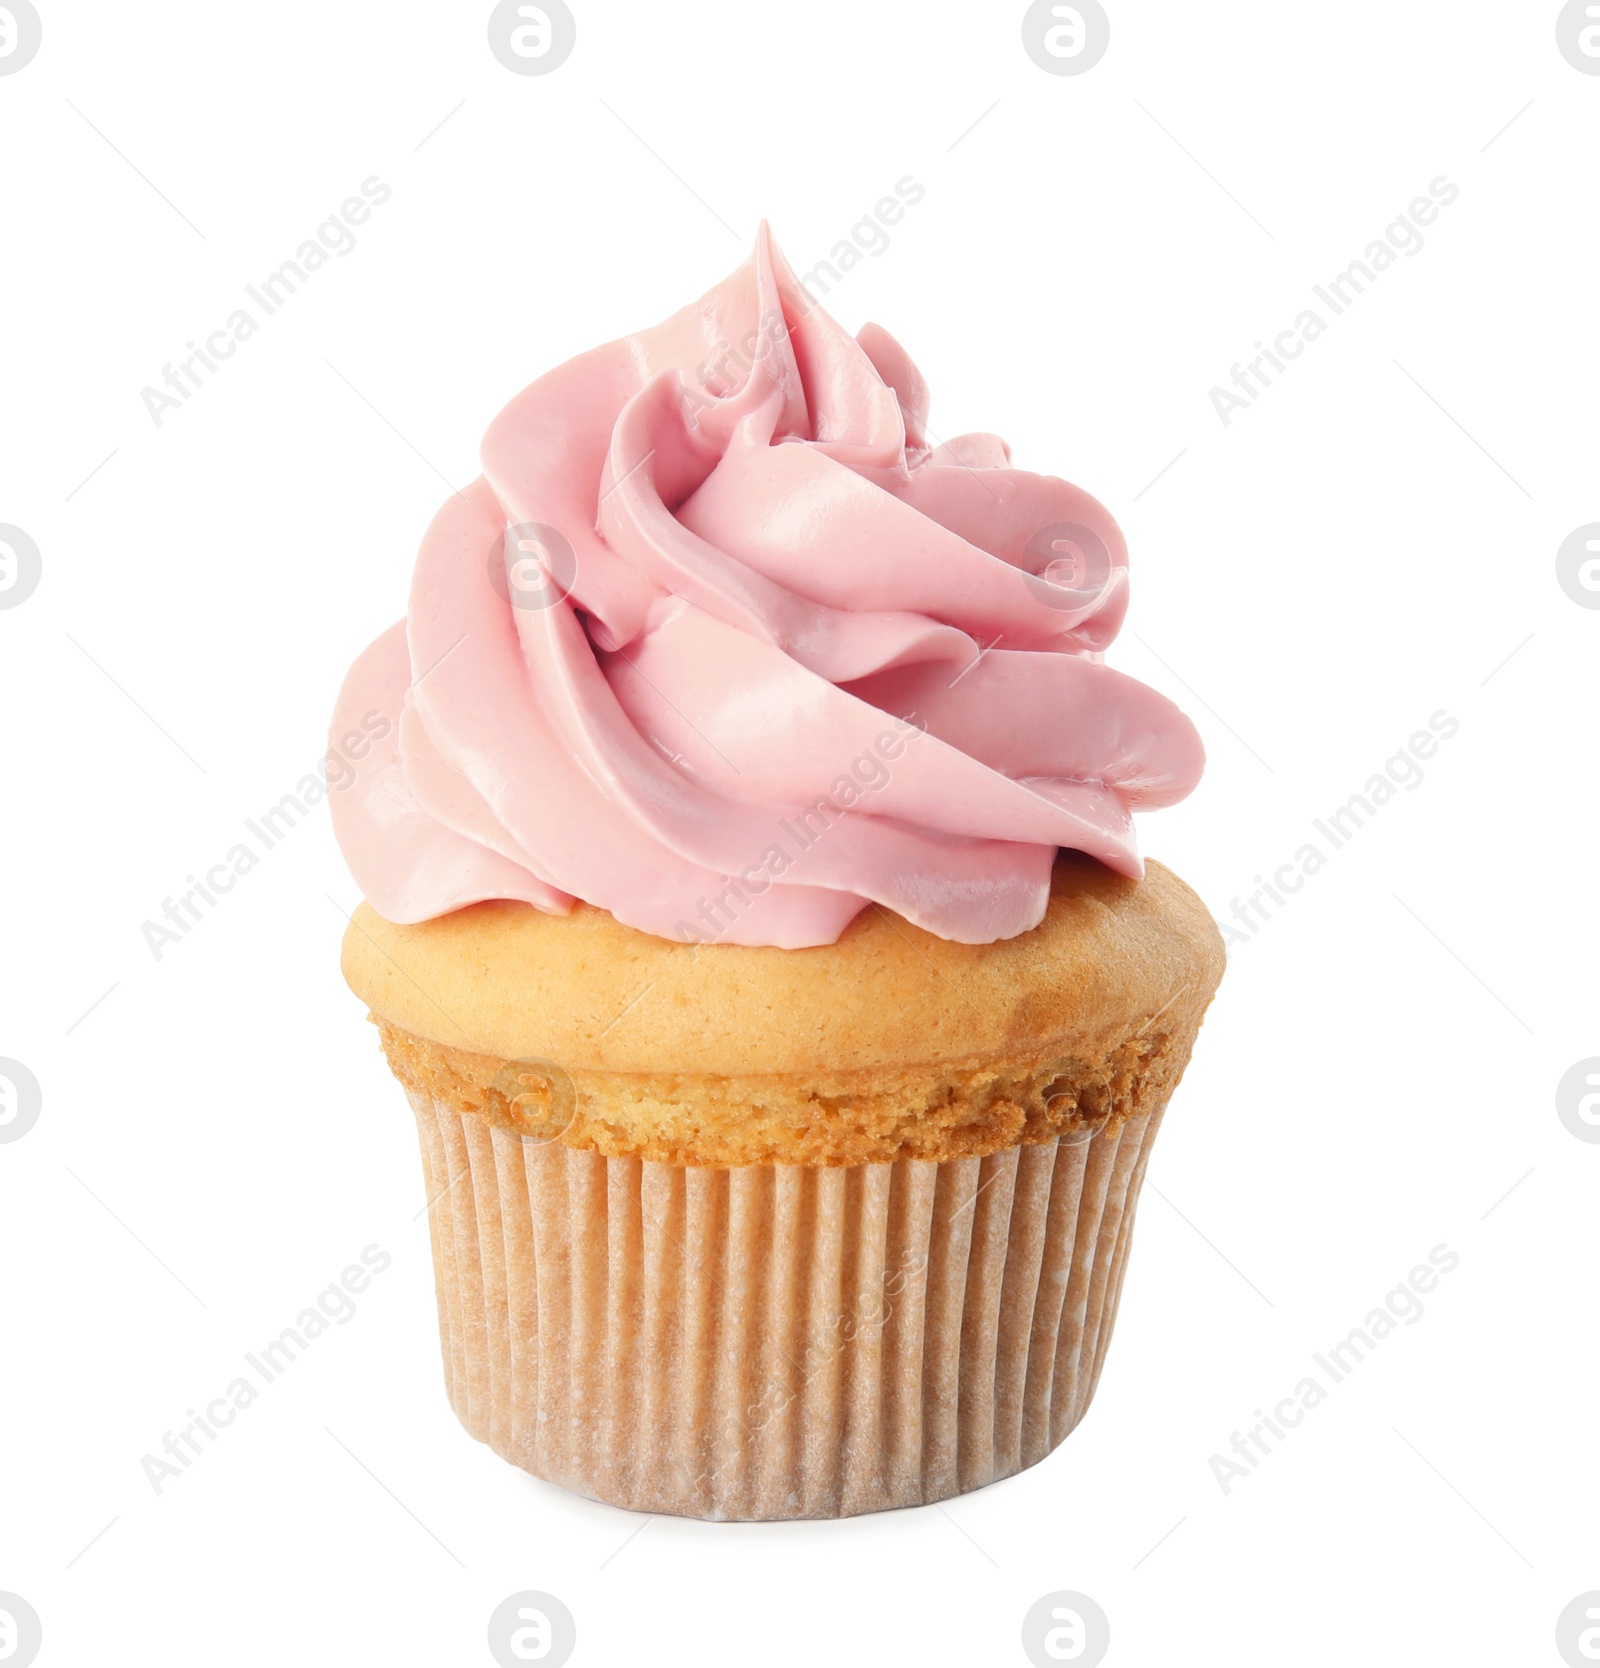 Photo of Delicious birthday cupcake decorated with cream on white background